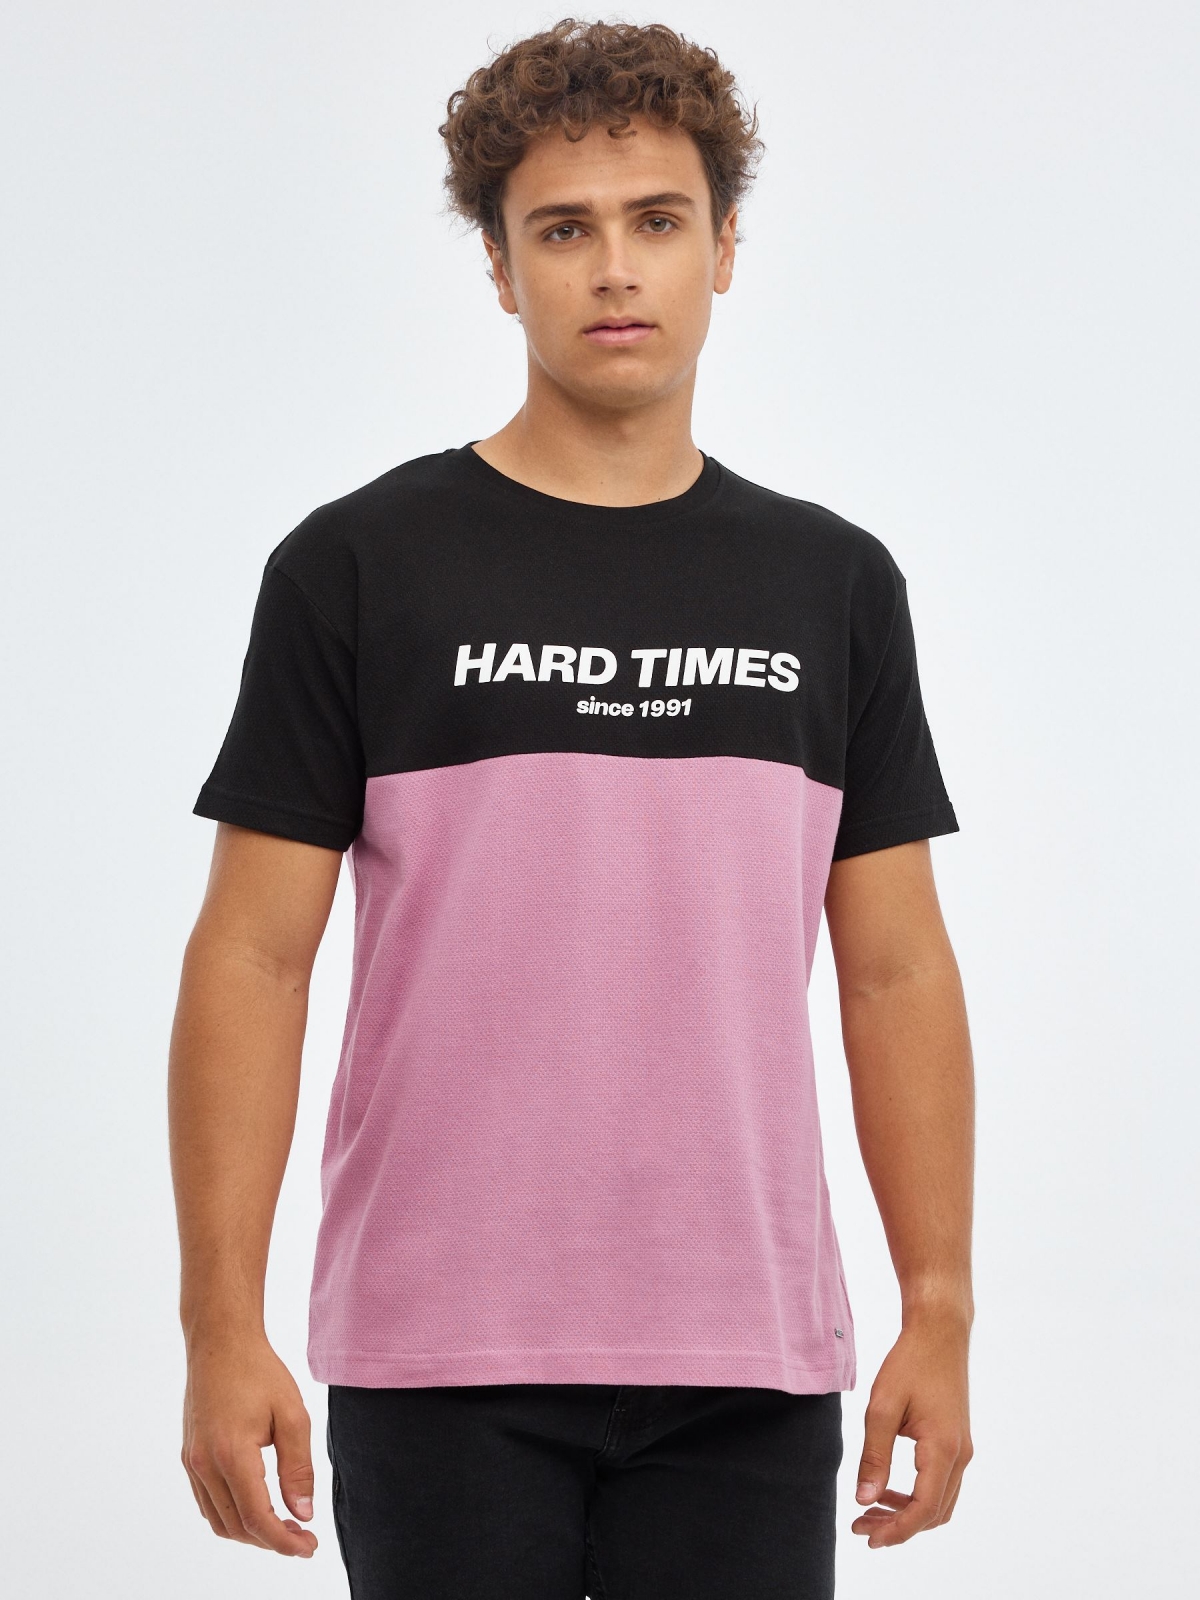 Hard Times T-shirt black middle front view